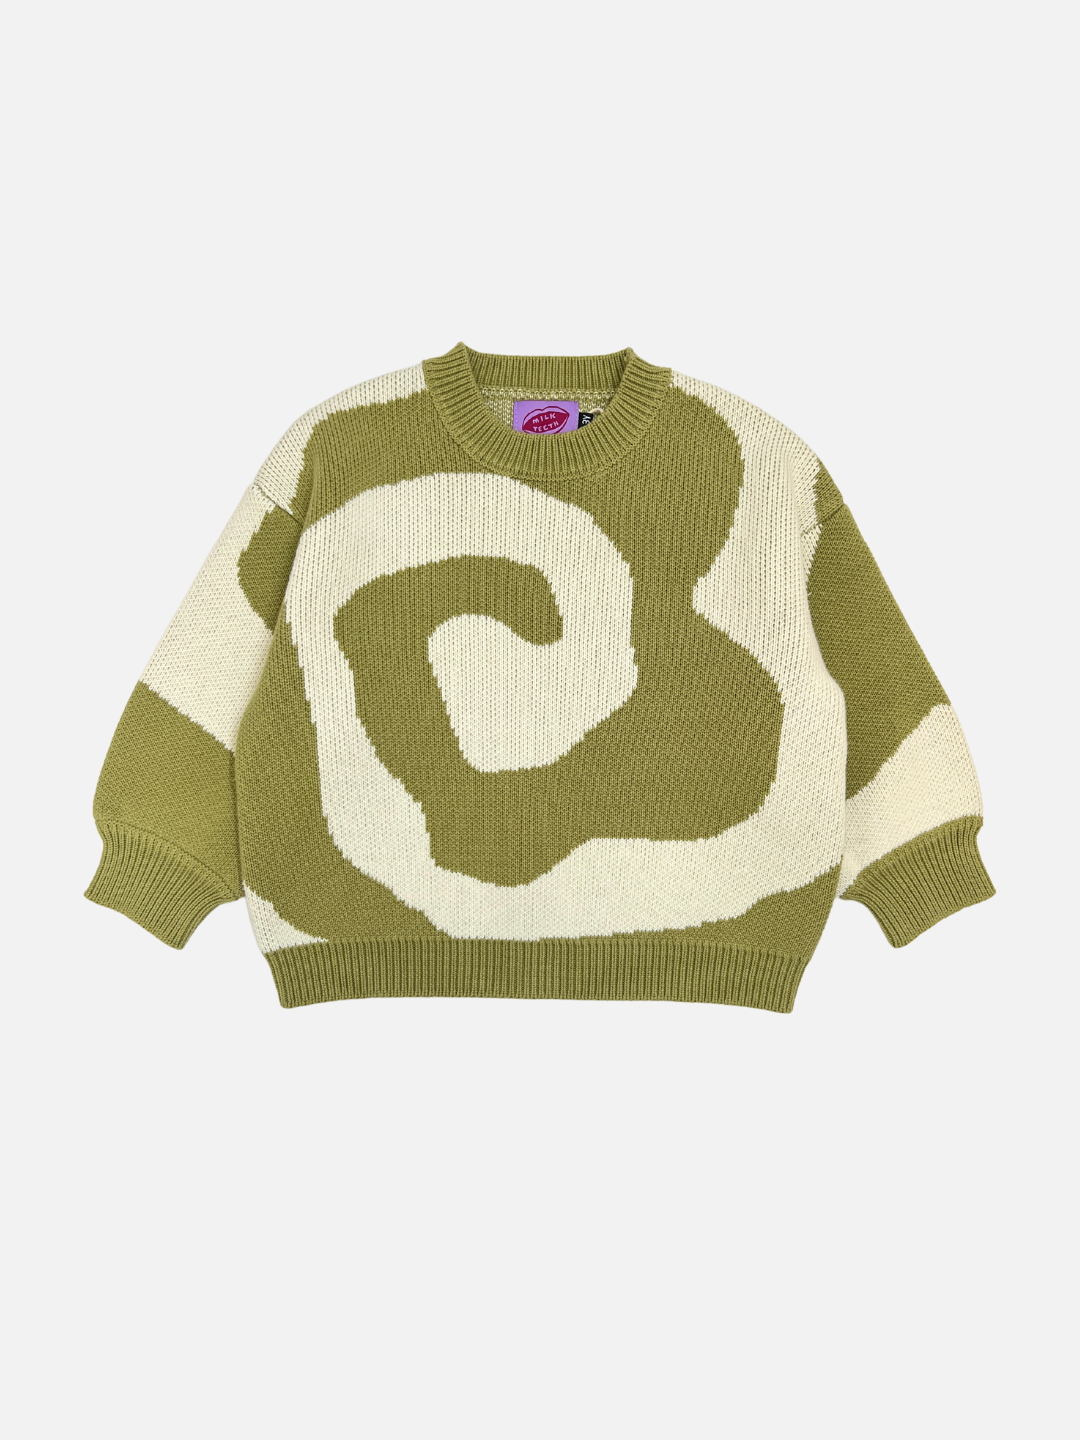 Front view of kids crewneck sweater in sage green, with a large single cream swirl design that covers the entire sweater.